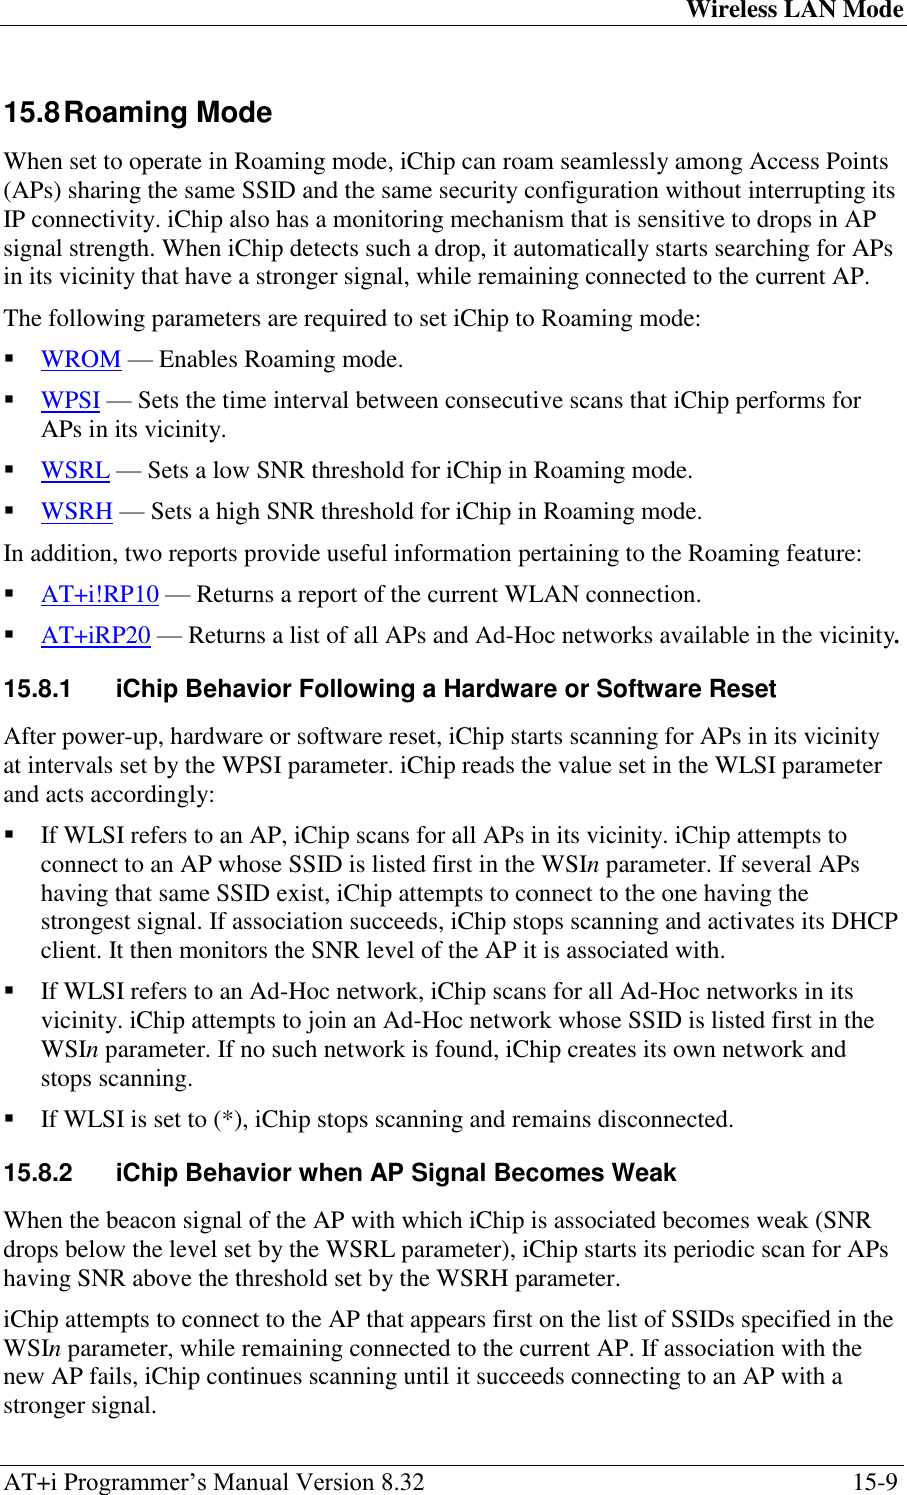 Wireless LAN Mode AT+i Programmer‘s Manual Version 8.32  15-9 15.8 Roaming Mode When set to operate in Roaming mode, iChip can roam seamlessly among Access Points (APs) sharing the same SSID and the same security configuration without interrupting its IP connectivity. iChip also has a monitoring mechanism that is sensitive to drops in AP signal strength. When iChip detects such a drop, it automatically starts searching for APs in its vicinity that have a stronger signal, while remaining connected to the current AP. The following parameters are required to set iChip to Roaming mode:  WROM — Enables Roaming mode.  WPSI — Sets the time interval between consecutive scans that iChip performs for APs in its vicinity.  WSRL — Sets a low SNR threshold for iChip in Roaming mode.  WSRH — Sets a high SNR threshold for iChip in Roaming mode. In addition, two reports provide useful information pertaining to the Roaming feature:  AT+i!RP10 — Returns a report of the current WLAN connection.  AT+iRP20 — Returns a list of all APs and Ad-Hoc networks available in the vicinity. 15.8.1  iChip Behavior Following a Hardware or Software Reset After power-up, hardware or software reset, iChip starts scanning for APs in its vicinity at intervals set by the WPSI parameter. iChip reads the value set in the WLSI parameter and acts accordingly:  If WLSI refers to an AP, iChip scans for all APs in its vicinity. iChip attempts to connect to an AP whose SSID is listed first in the WSIn parameter. If several APs having that same SSID exist, iChip attempts to connect to the one having the strongest signal. If association succeeds, iChip stops scanning and activates its DHCP client. It then monitors the SNR level of the AP it is associated with.  If WLSI refers to an Ad-Hoc network, iChip scans for all Ad-Hoc networks in its vicinity. iChip attempts to join an Ad-Hoc network whose SSID is listed first in the WSIn parameter. If no such network is found, iChip creates its own network and stops scanning.  If WLSI is set to (*), iChip stops scanning and remains disconnected. 15.8.2  iChip Behavior when AP Signal Becomes Weak When the beacon signal of the AP with which iChip is associated becomes weak (SNR drops below the level set by the WSRL parameter), iChip starts its periodic scan for APs having SNR above the threshold set by the WSRH parameter. iChip attempts to connect to the AP that appears first on the list of SSIDs specified in the WSIn parameter, while remaining connected to the current AP. If association with the new AP fails, iChip continues scanning until it succeeds connecting to an AP with a stronger signal. 